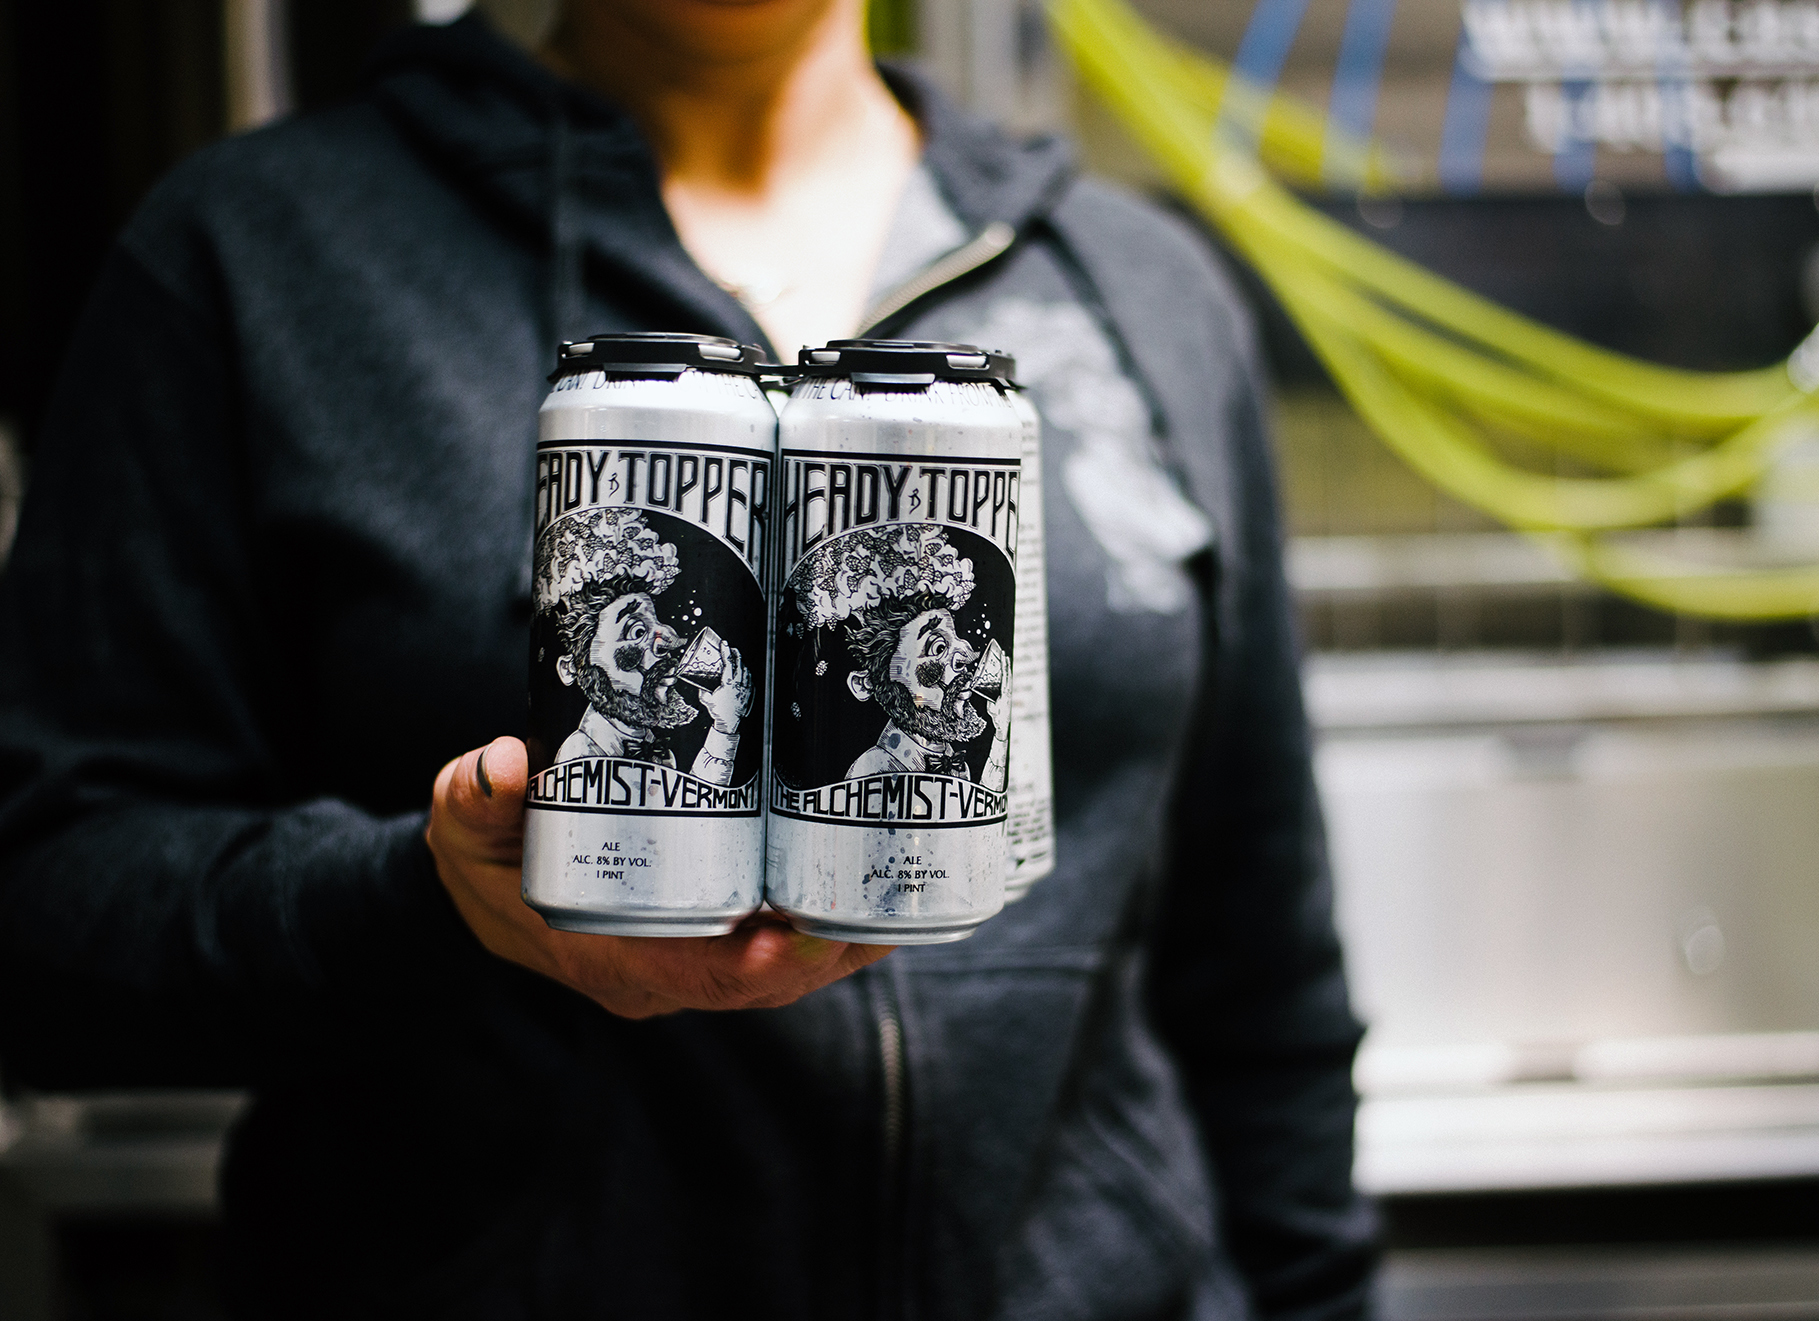 Cans of Heady Topper, one of the earliest murky beers credited with making haziness cool.